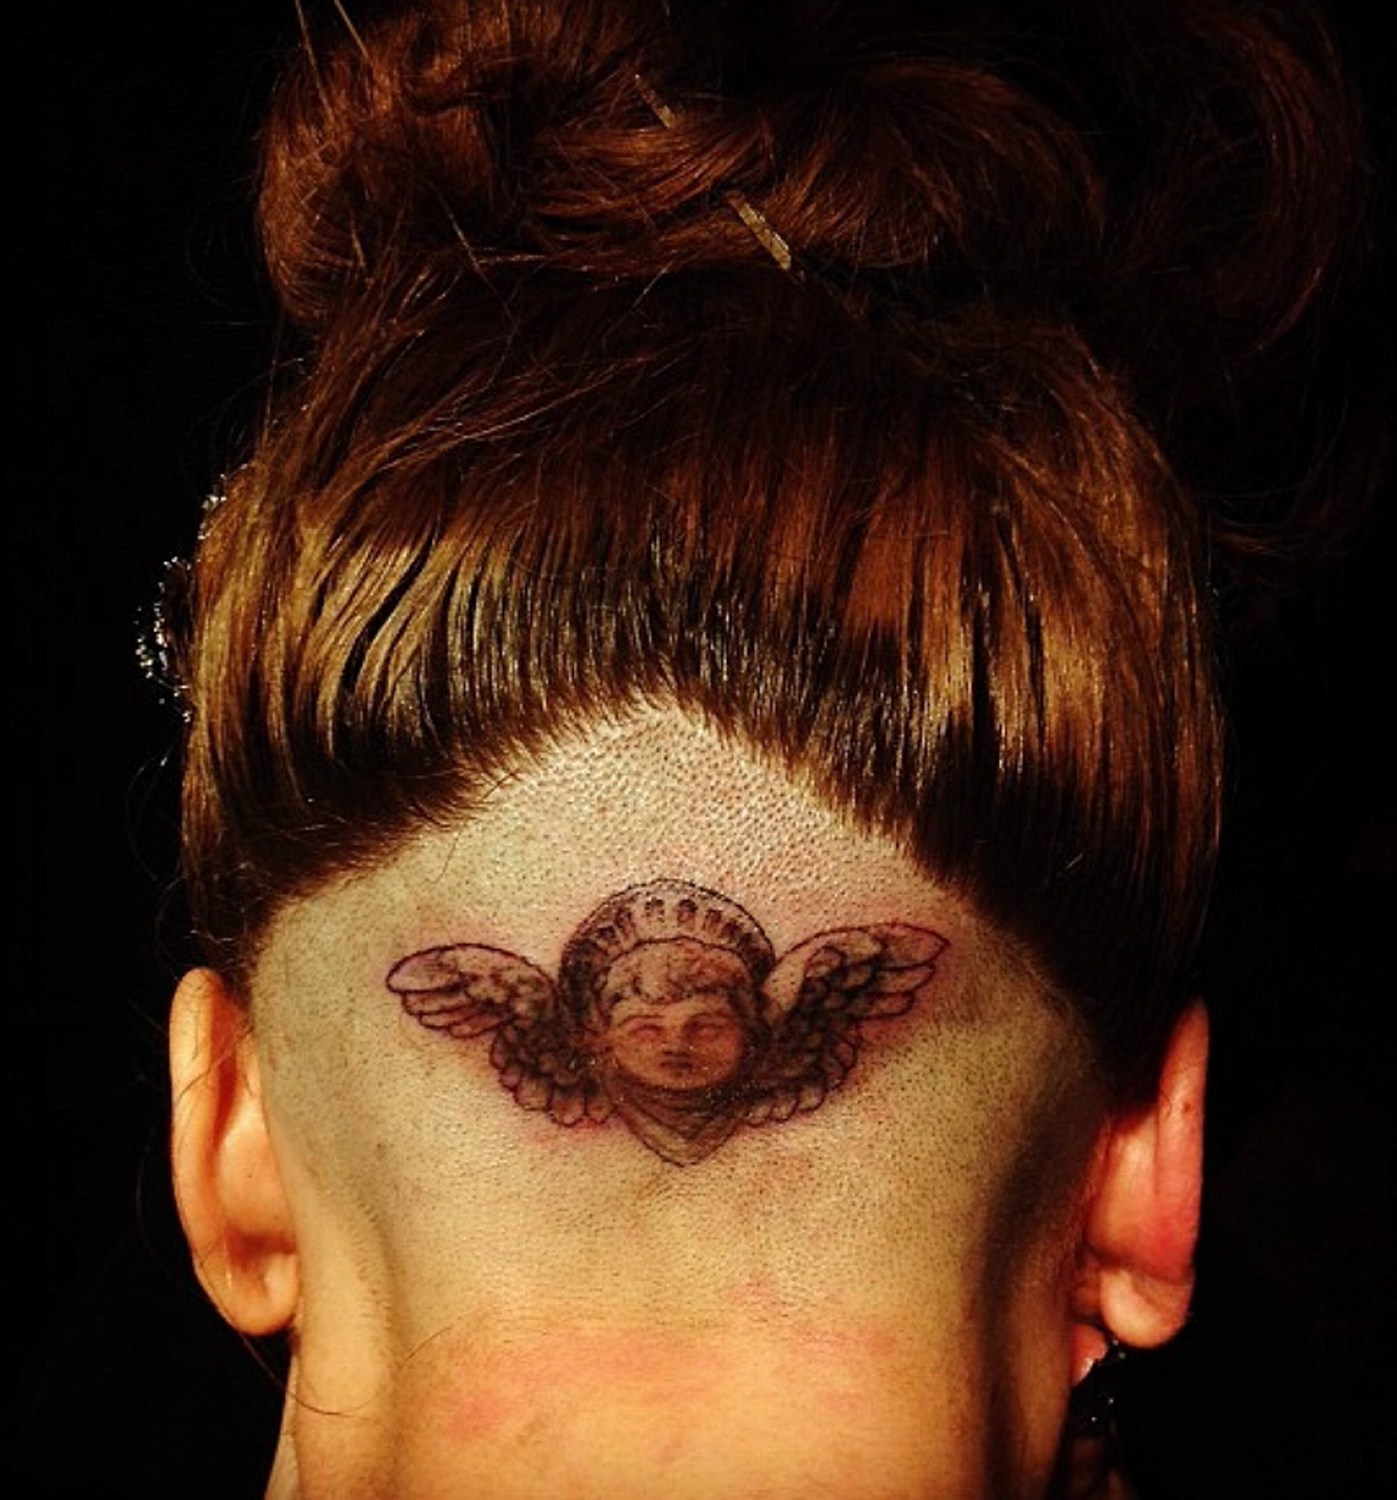 Lady Gaga gets new tattoo on her shaved head at perfume launch